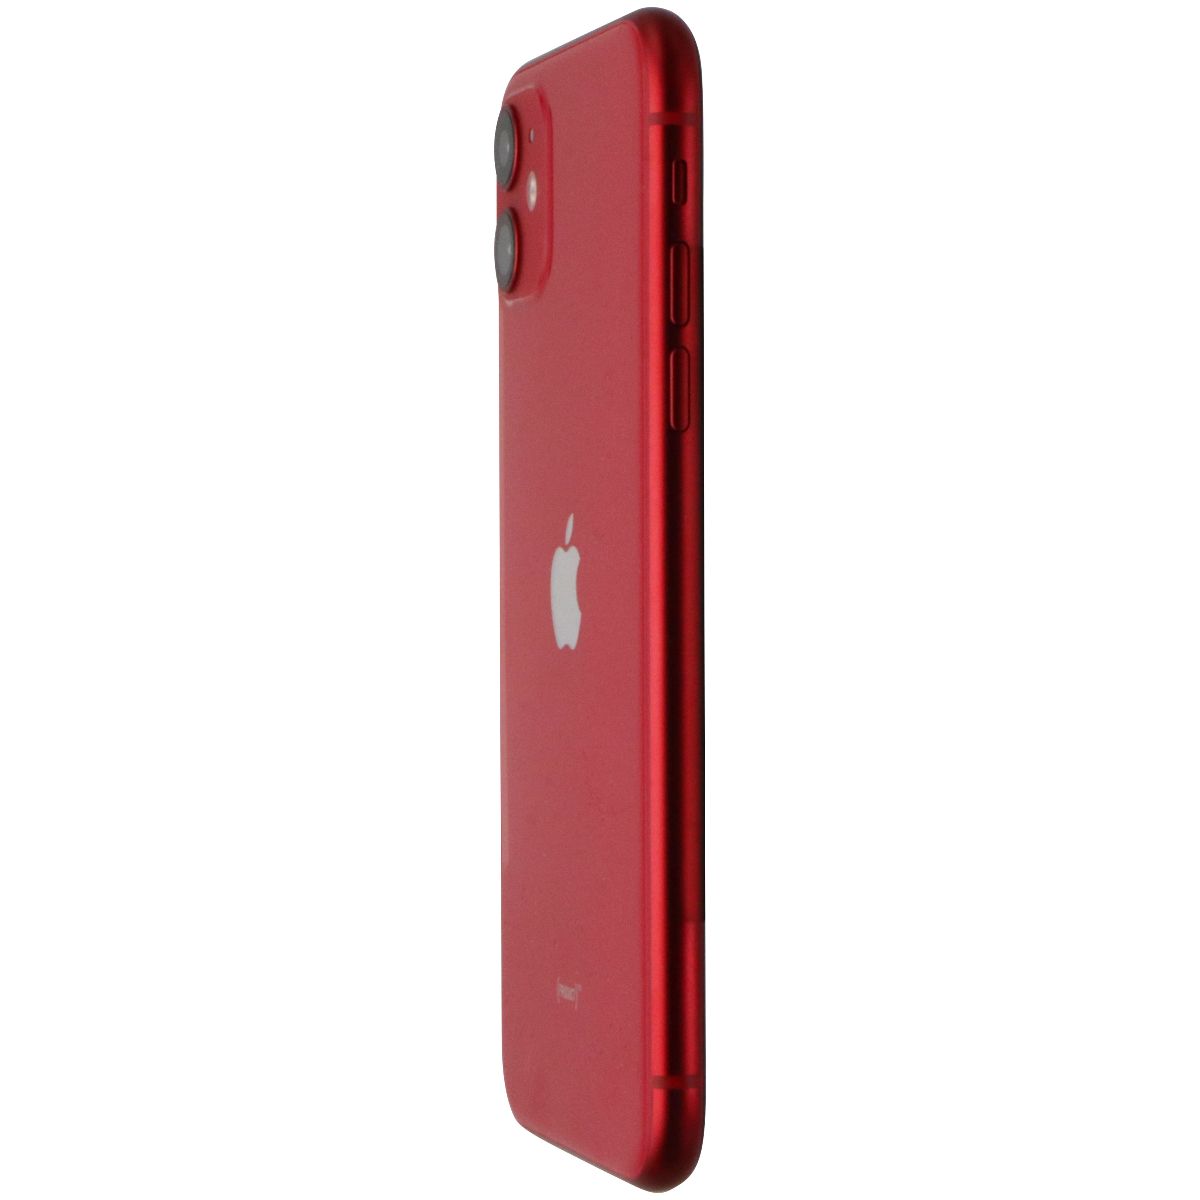 Apple iPhone 11 (6.1-in) (A2111) Unlocked - 64GB / Red - Bad Face ID*